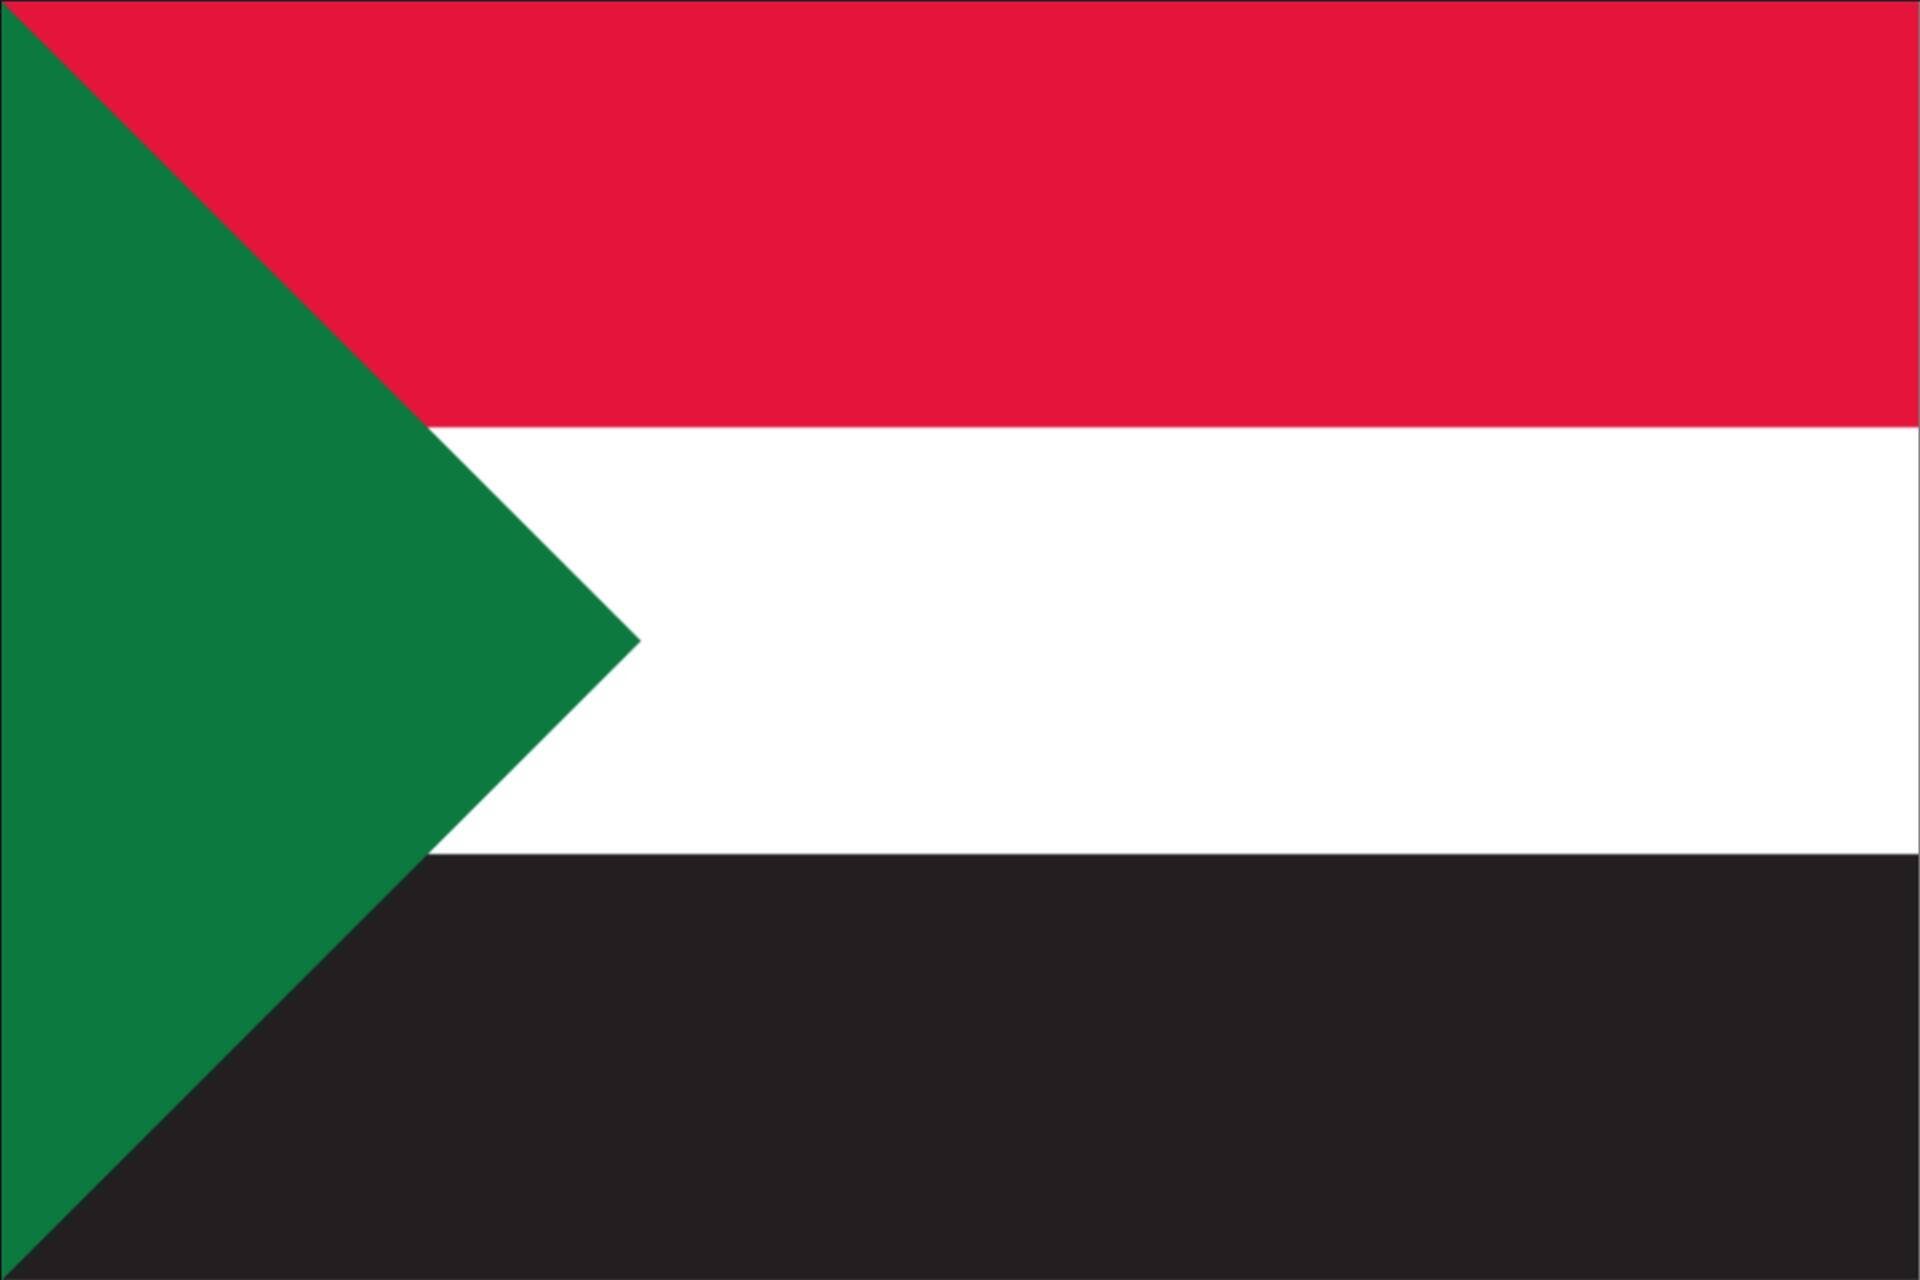 Sudan Flagge Querformat flaggenmeer g/m² Flagge 110